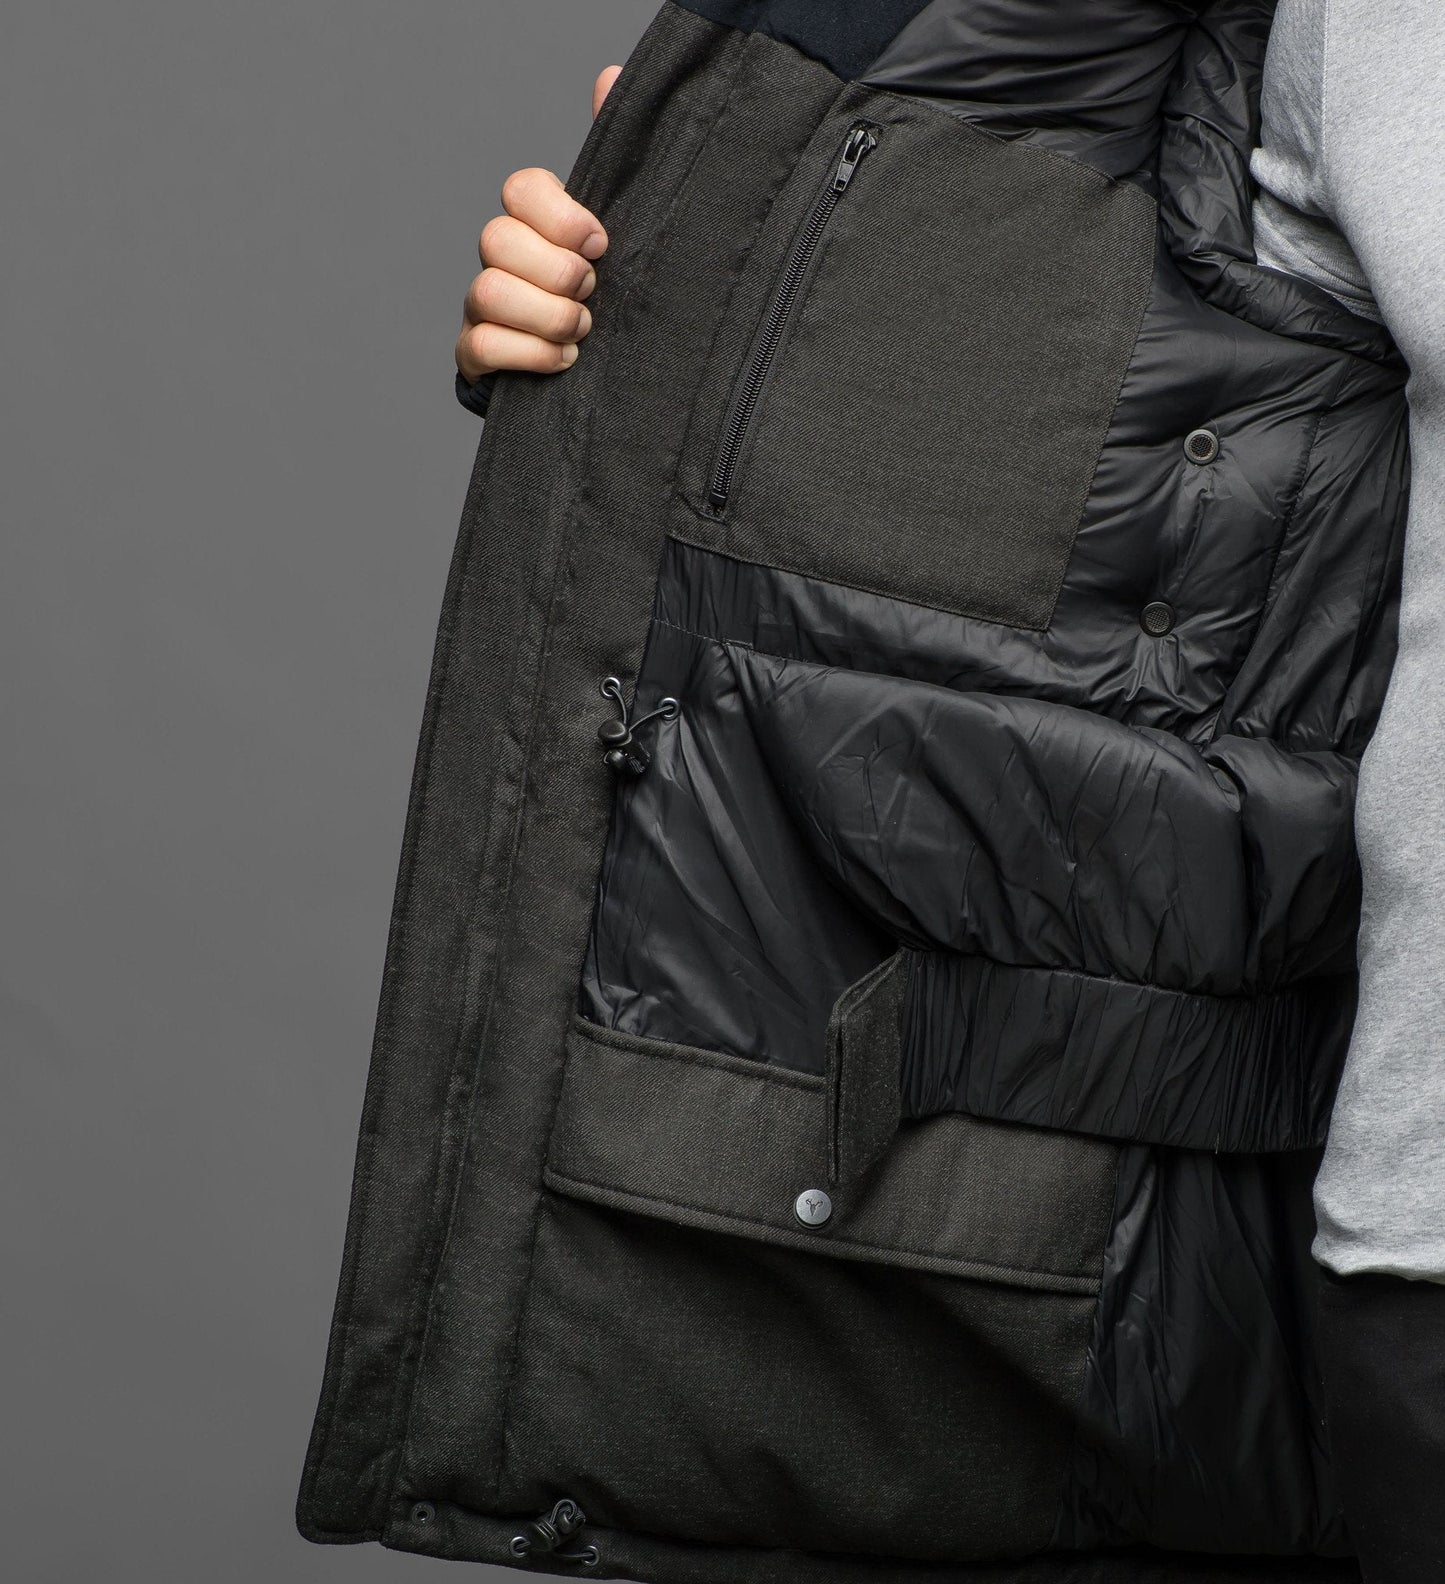 Men's extreme wamrth down filled parka with baffle box construction for even down distribution in H. Charcoal or H Red